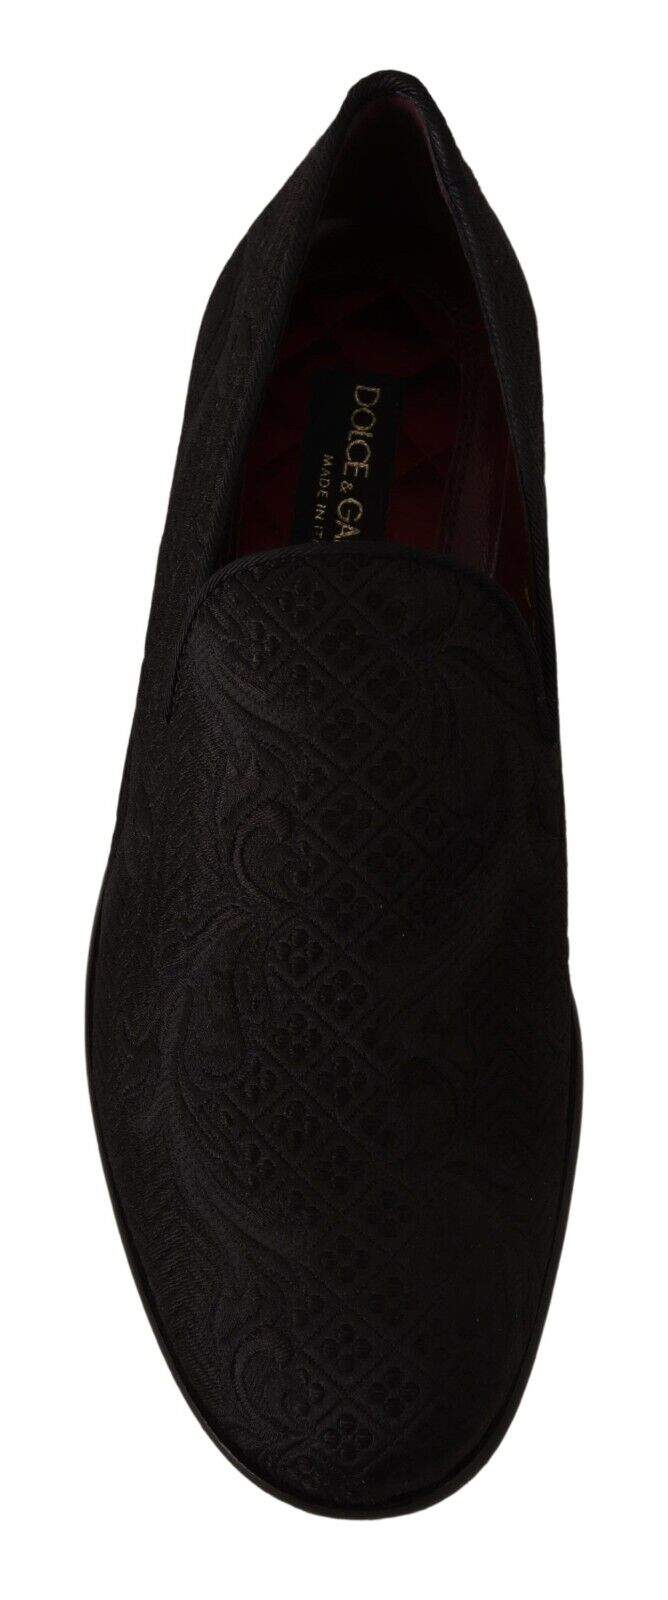 Dolce & Gabbana Black Floral Brocade Slippers Loafers Shoes #men, Black, Dolce & Gabbana, EU39/US6, feed-1, Loafers - Men - Shoes at SEYMAYKA